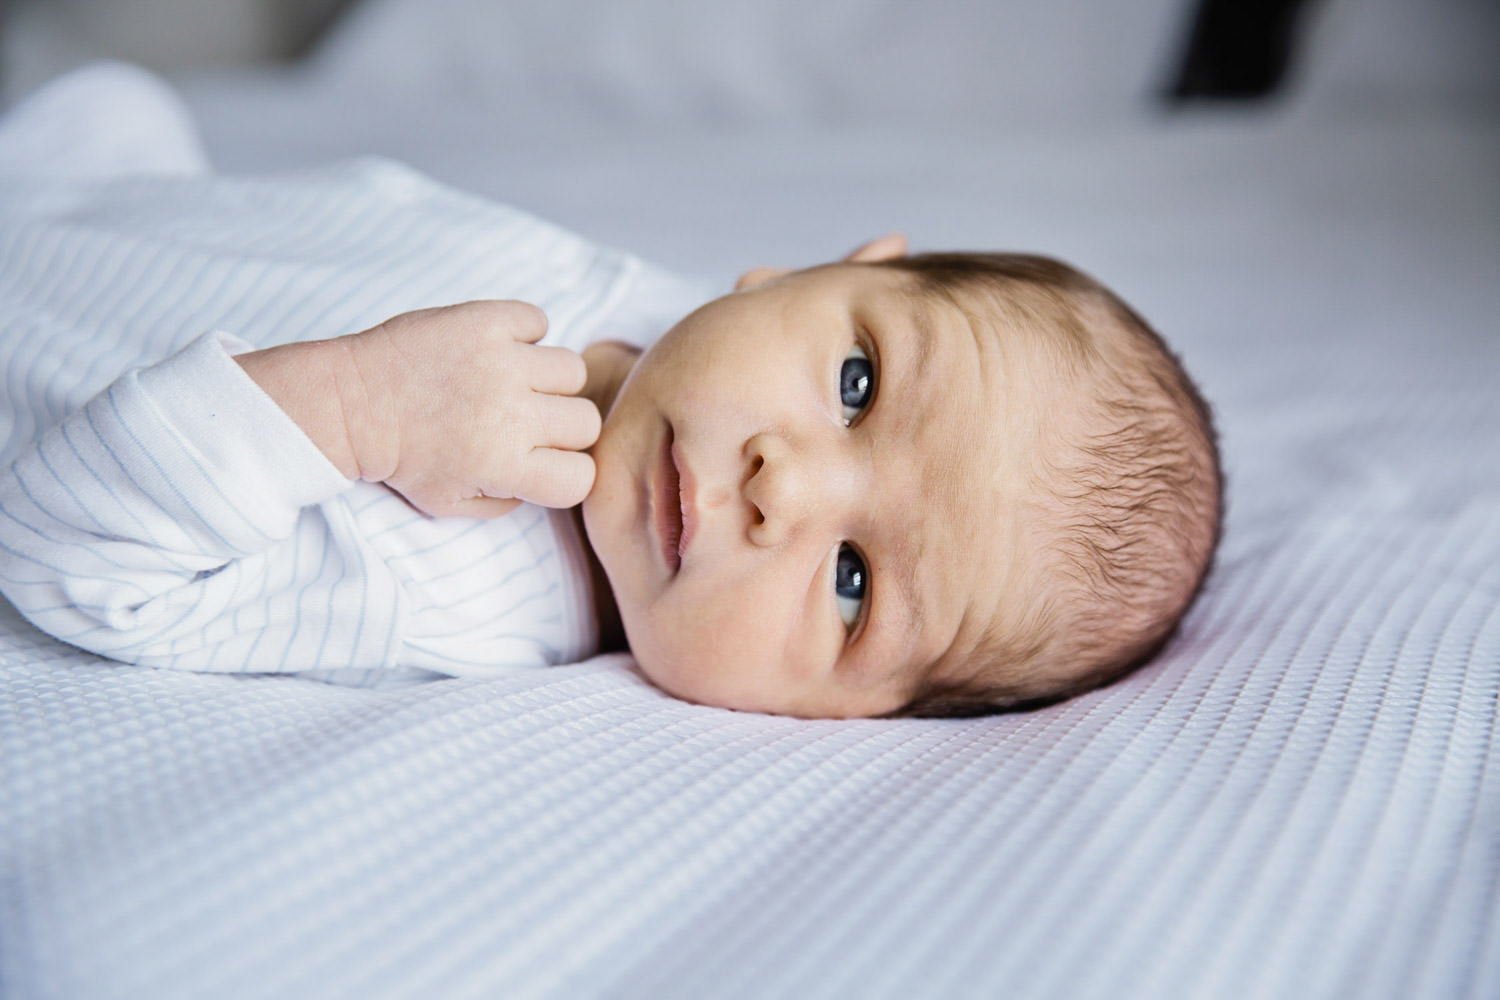 newborn-baby-looking-at-camera-with-hand-to-mouth-Natural-family-photography